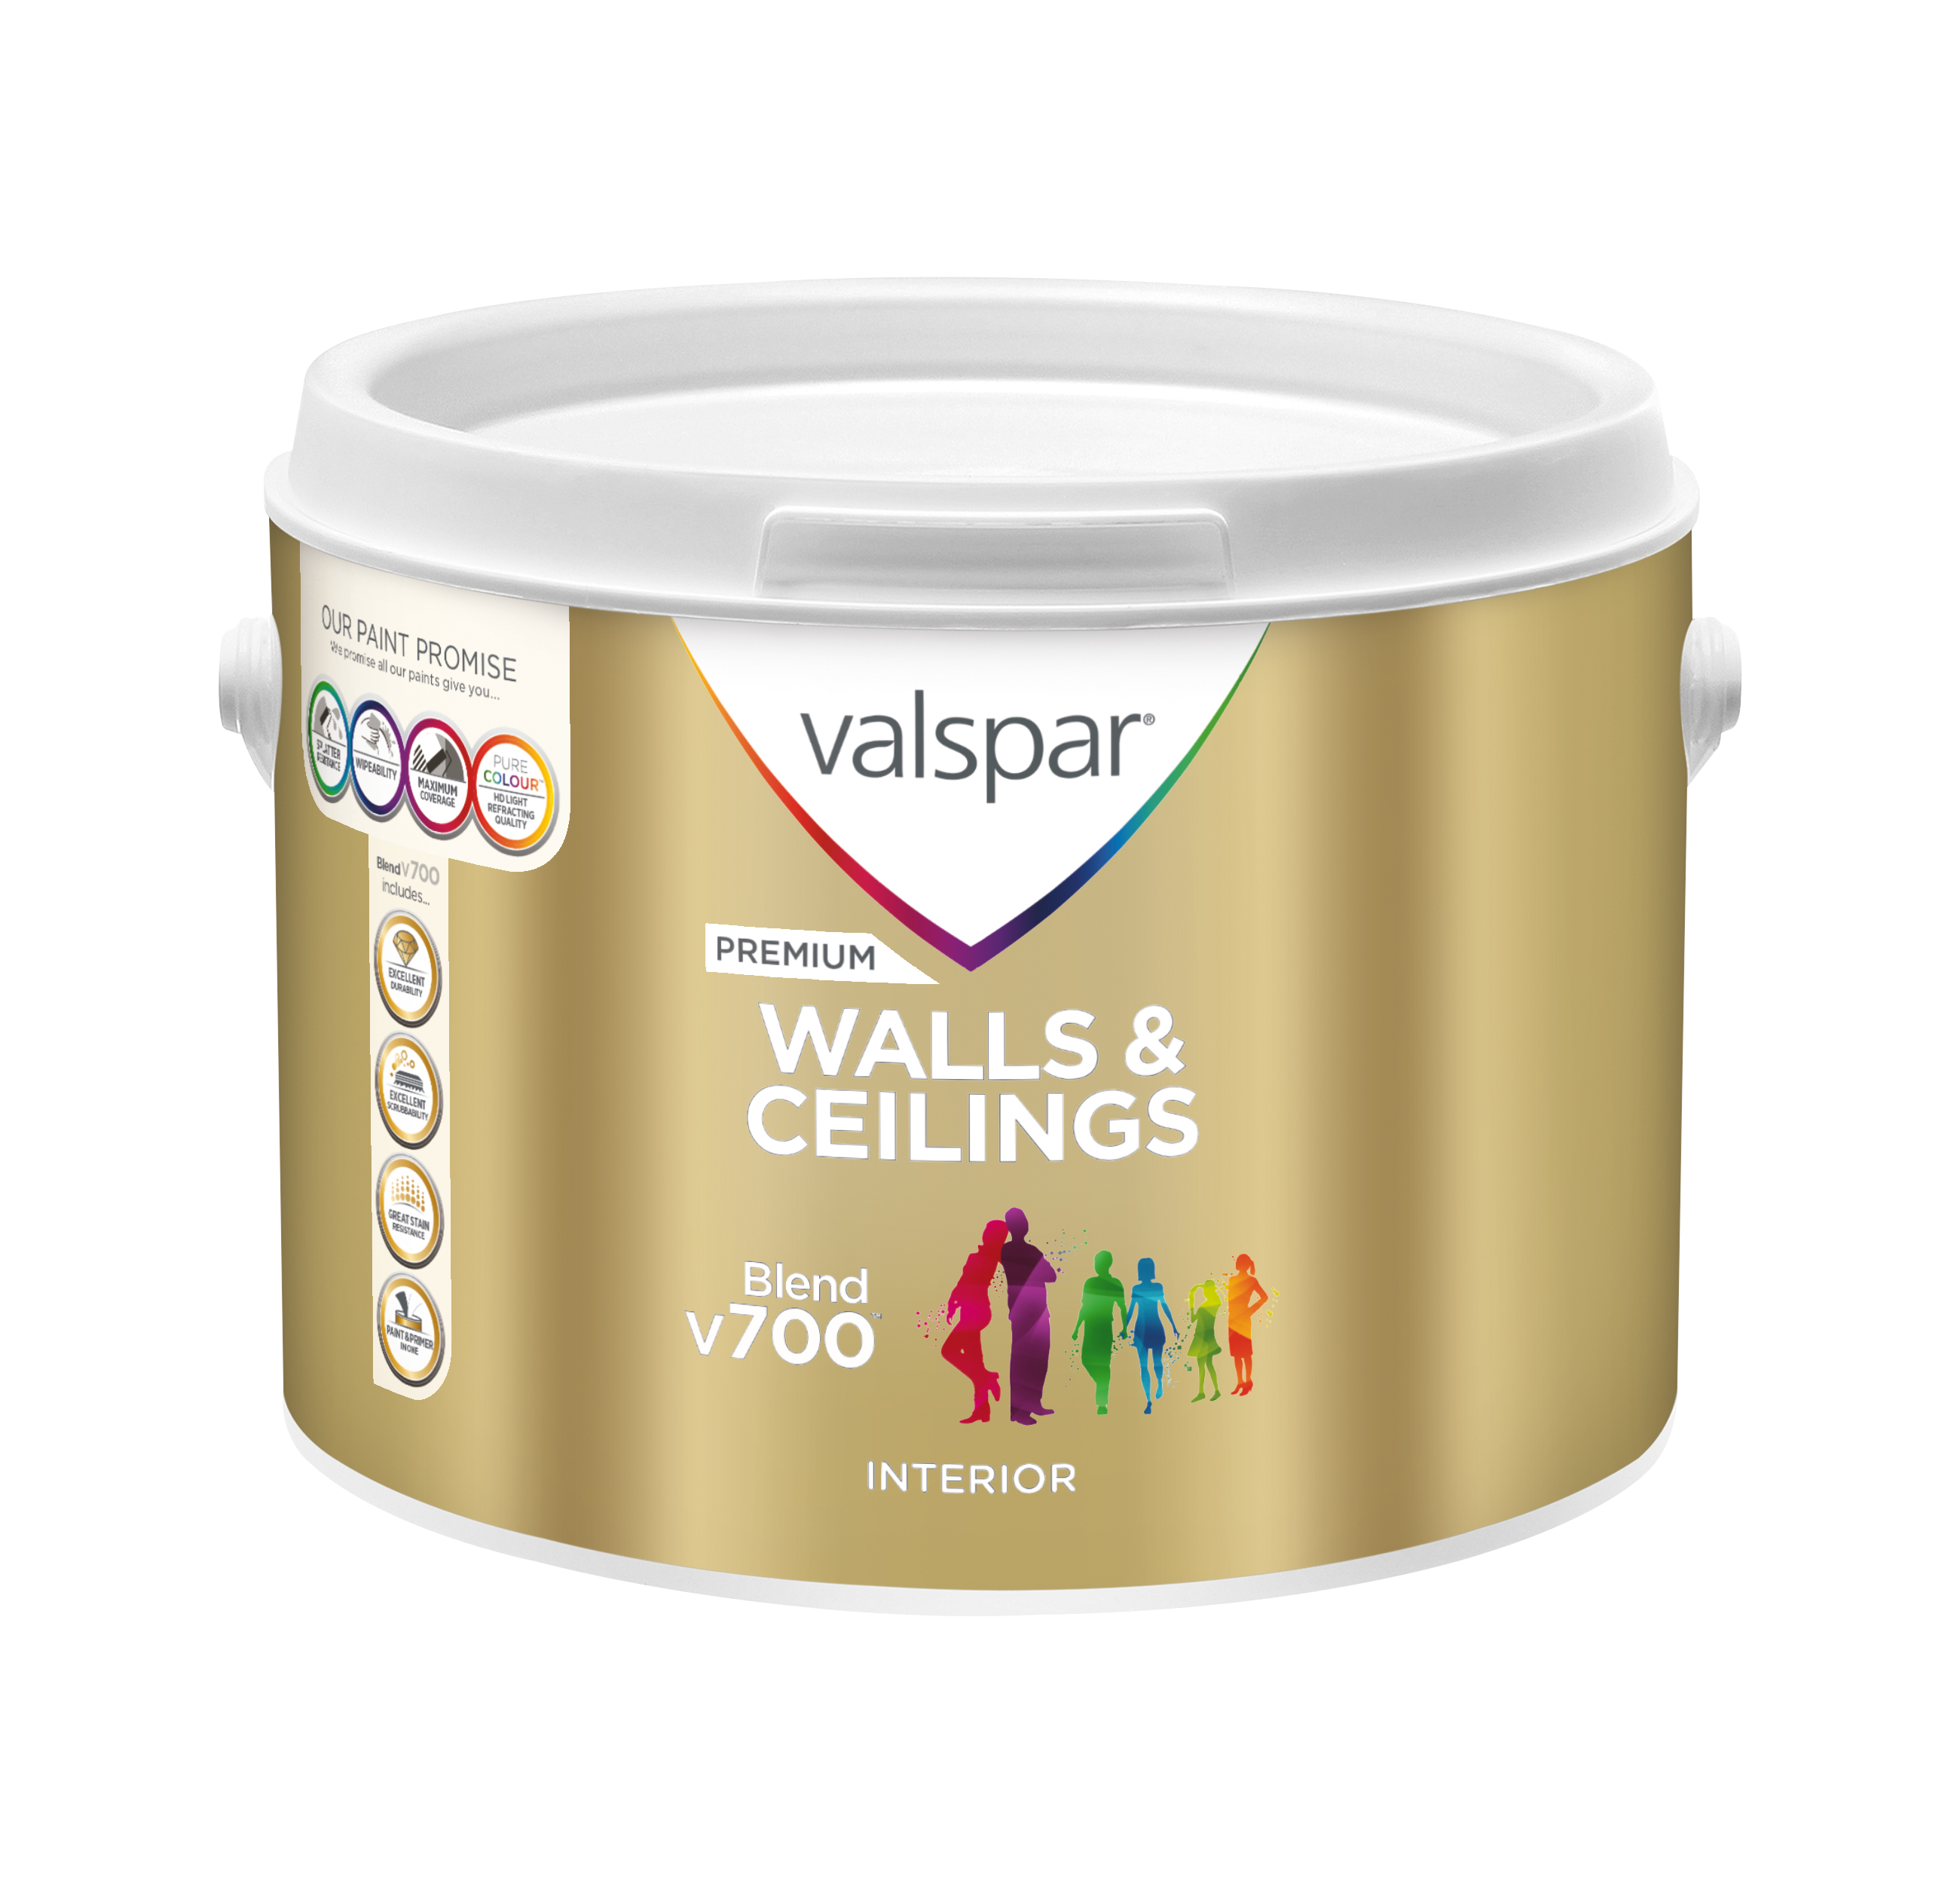 TOP OF THE POTS: VALSPAR v700 WALLS AND CEILINGS WINS GOLD IN GOOD HOUSEKEEPING INSTITUTE WASHABLE PAINT TEST @ValsparPaintUK @GHmagazine